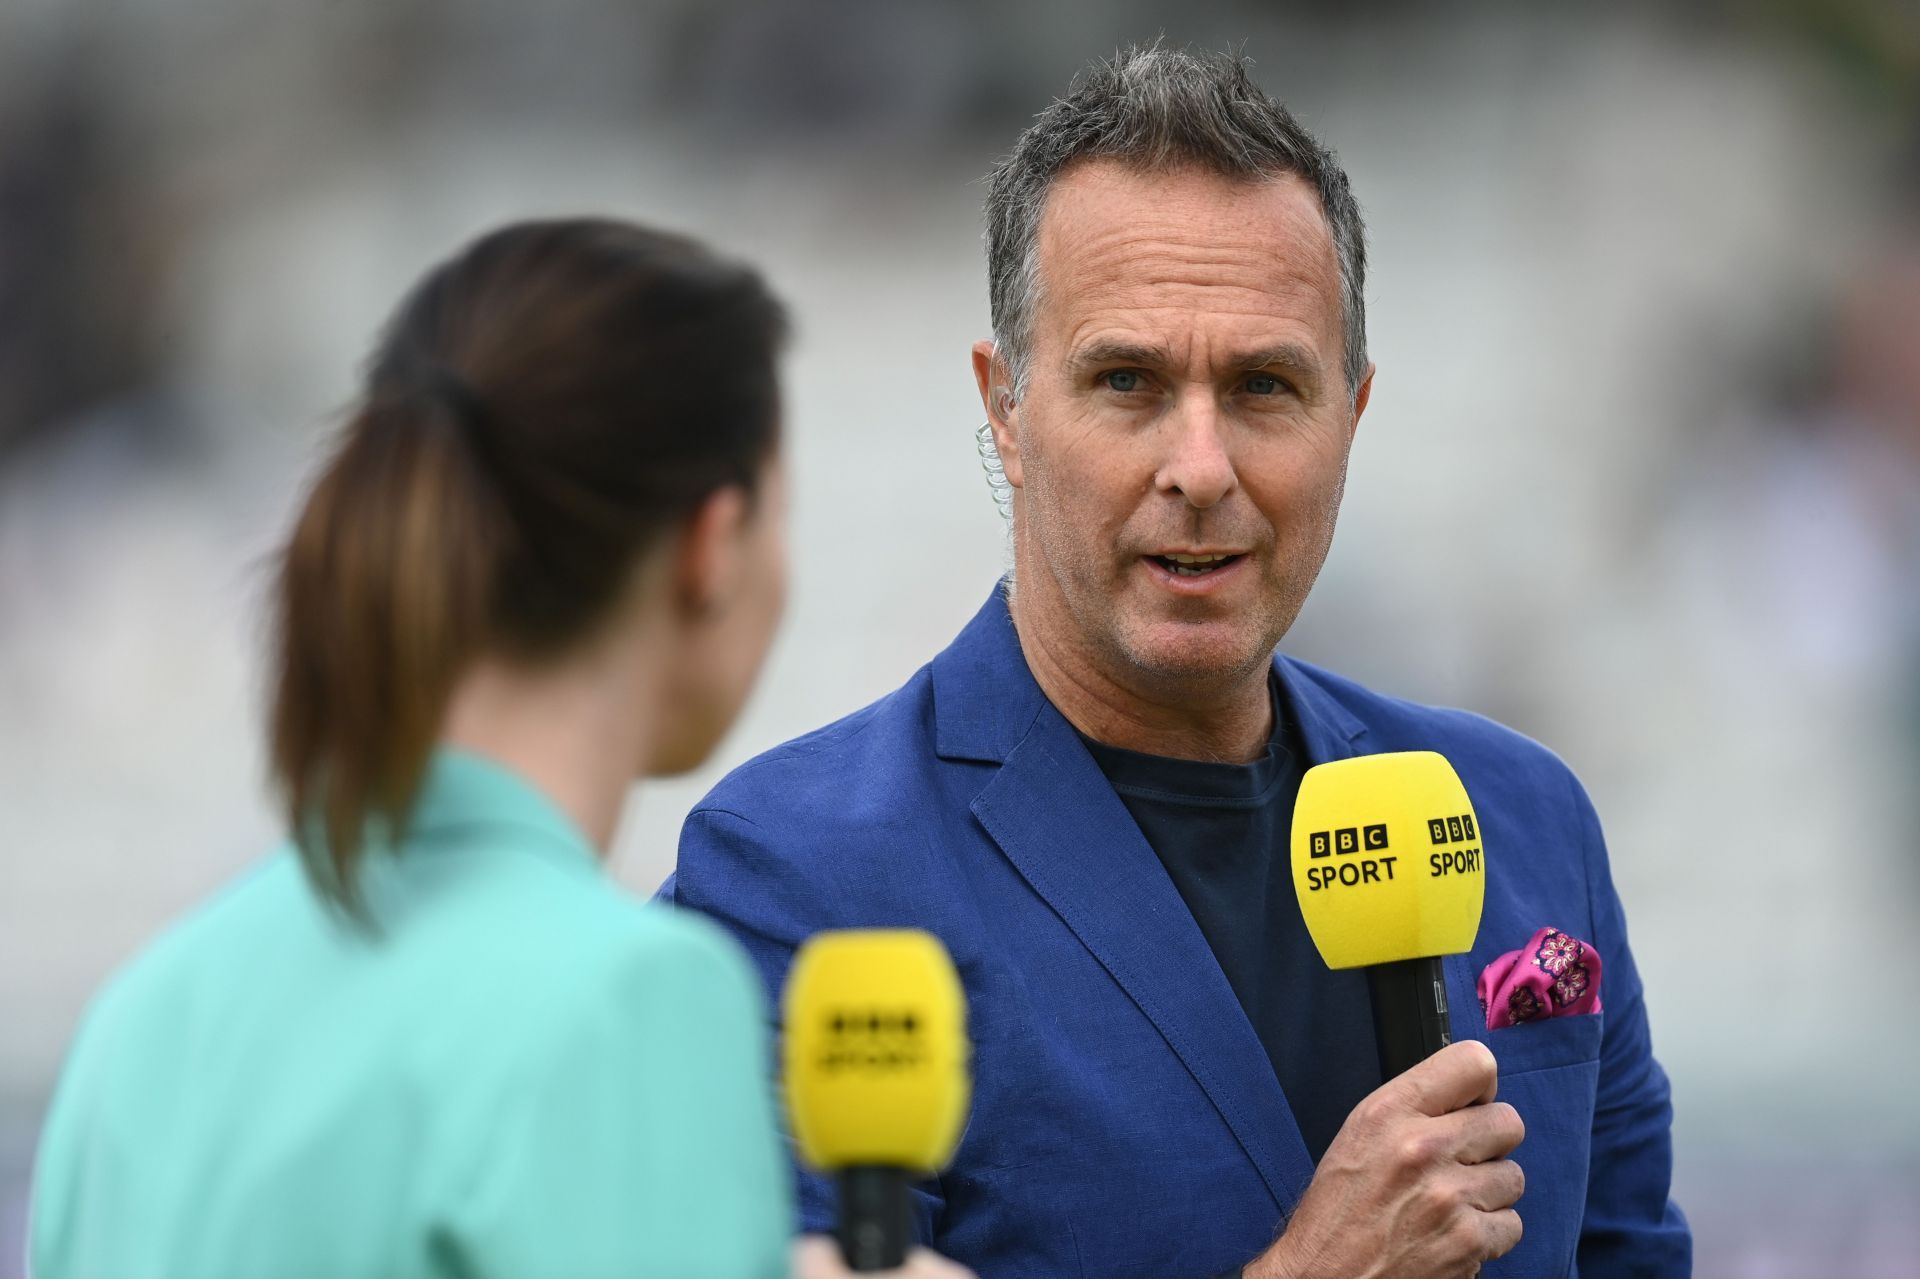 Michael Vaughan has shared some interesting thoughts on Bazball. (Pic: Getty Images)